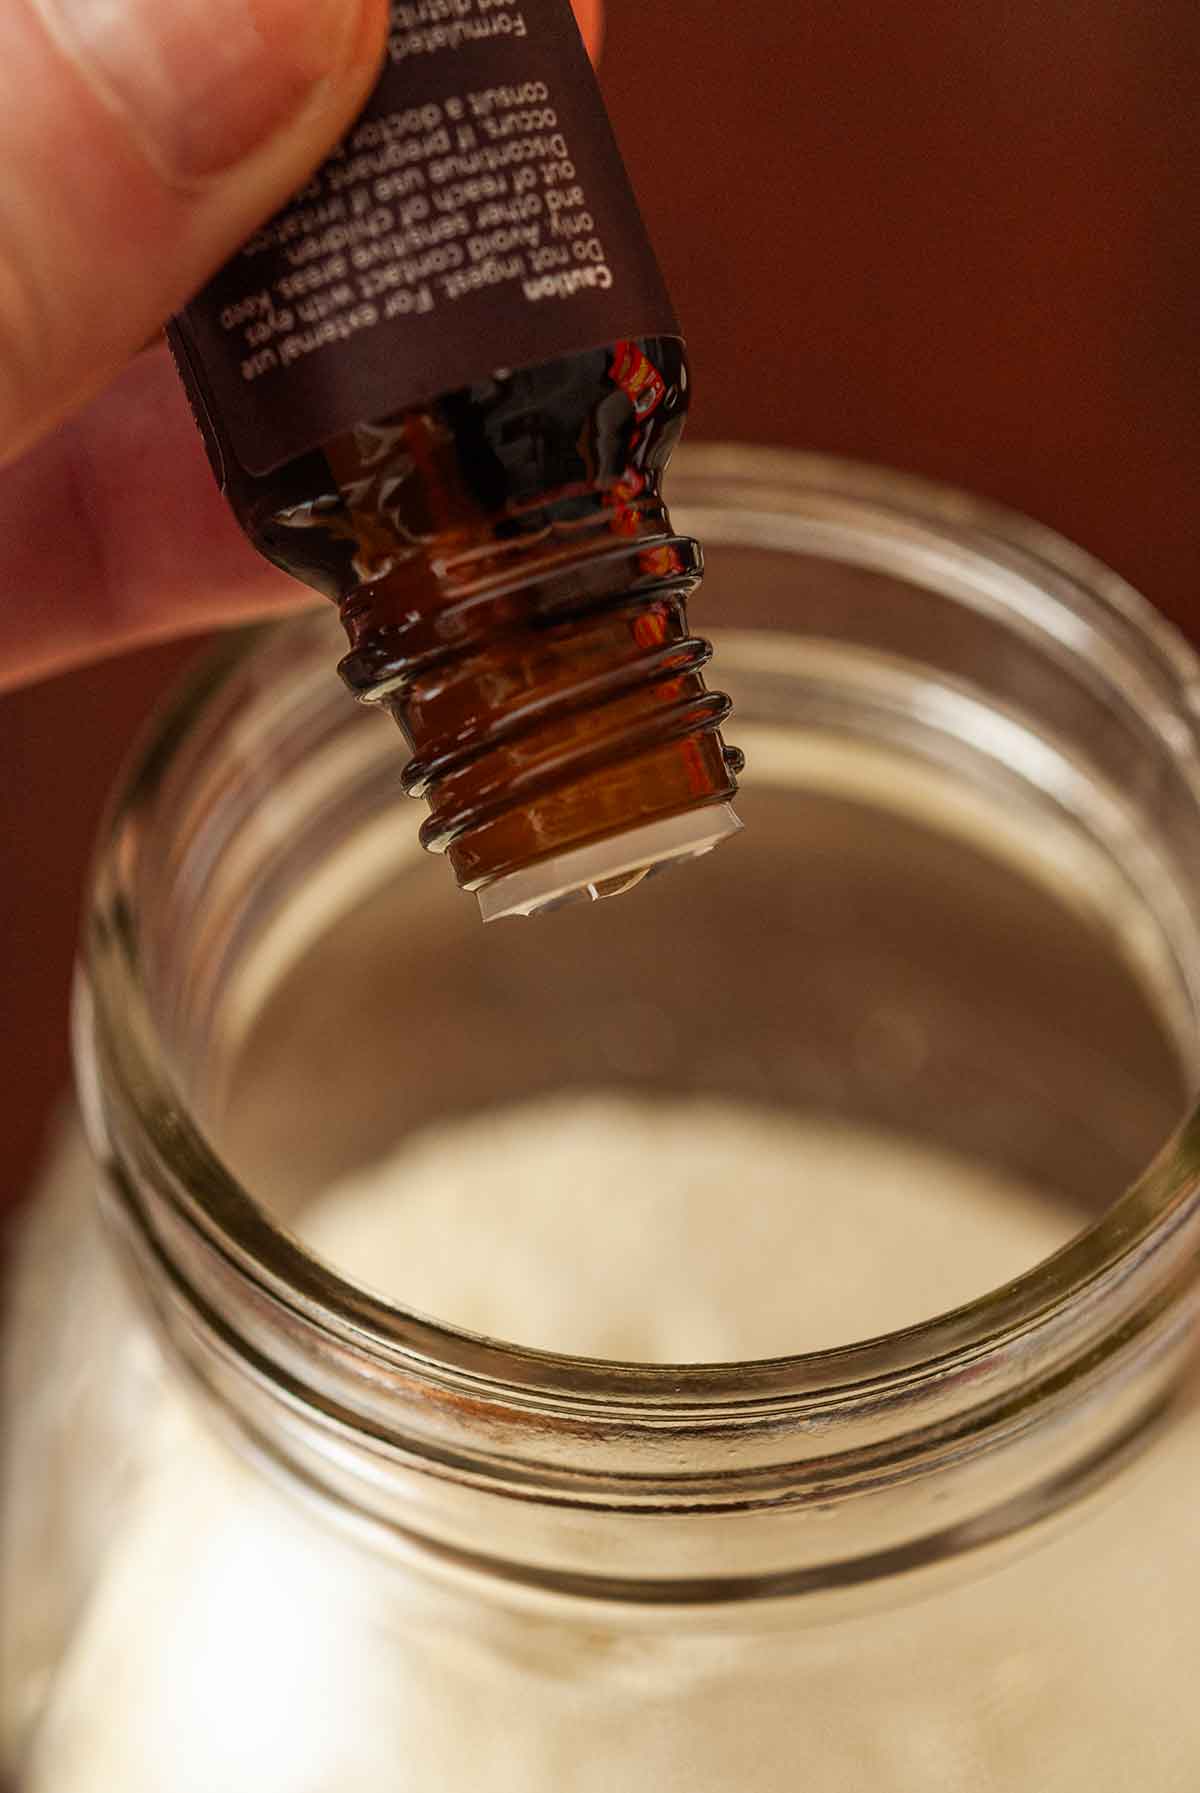 A small jar of oil dripping into milk in a jar.